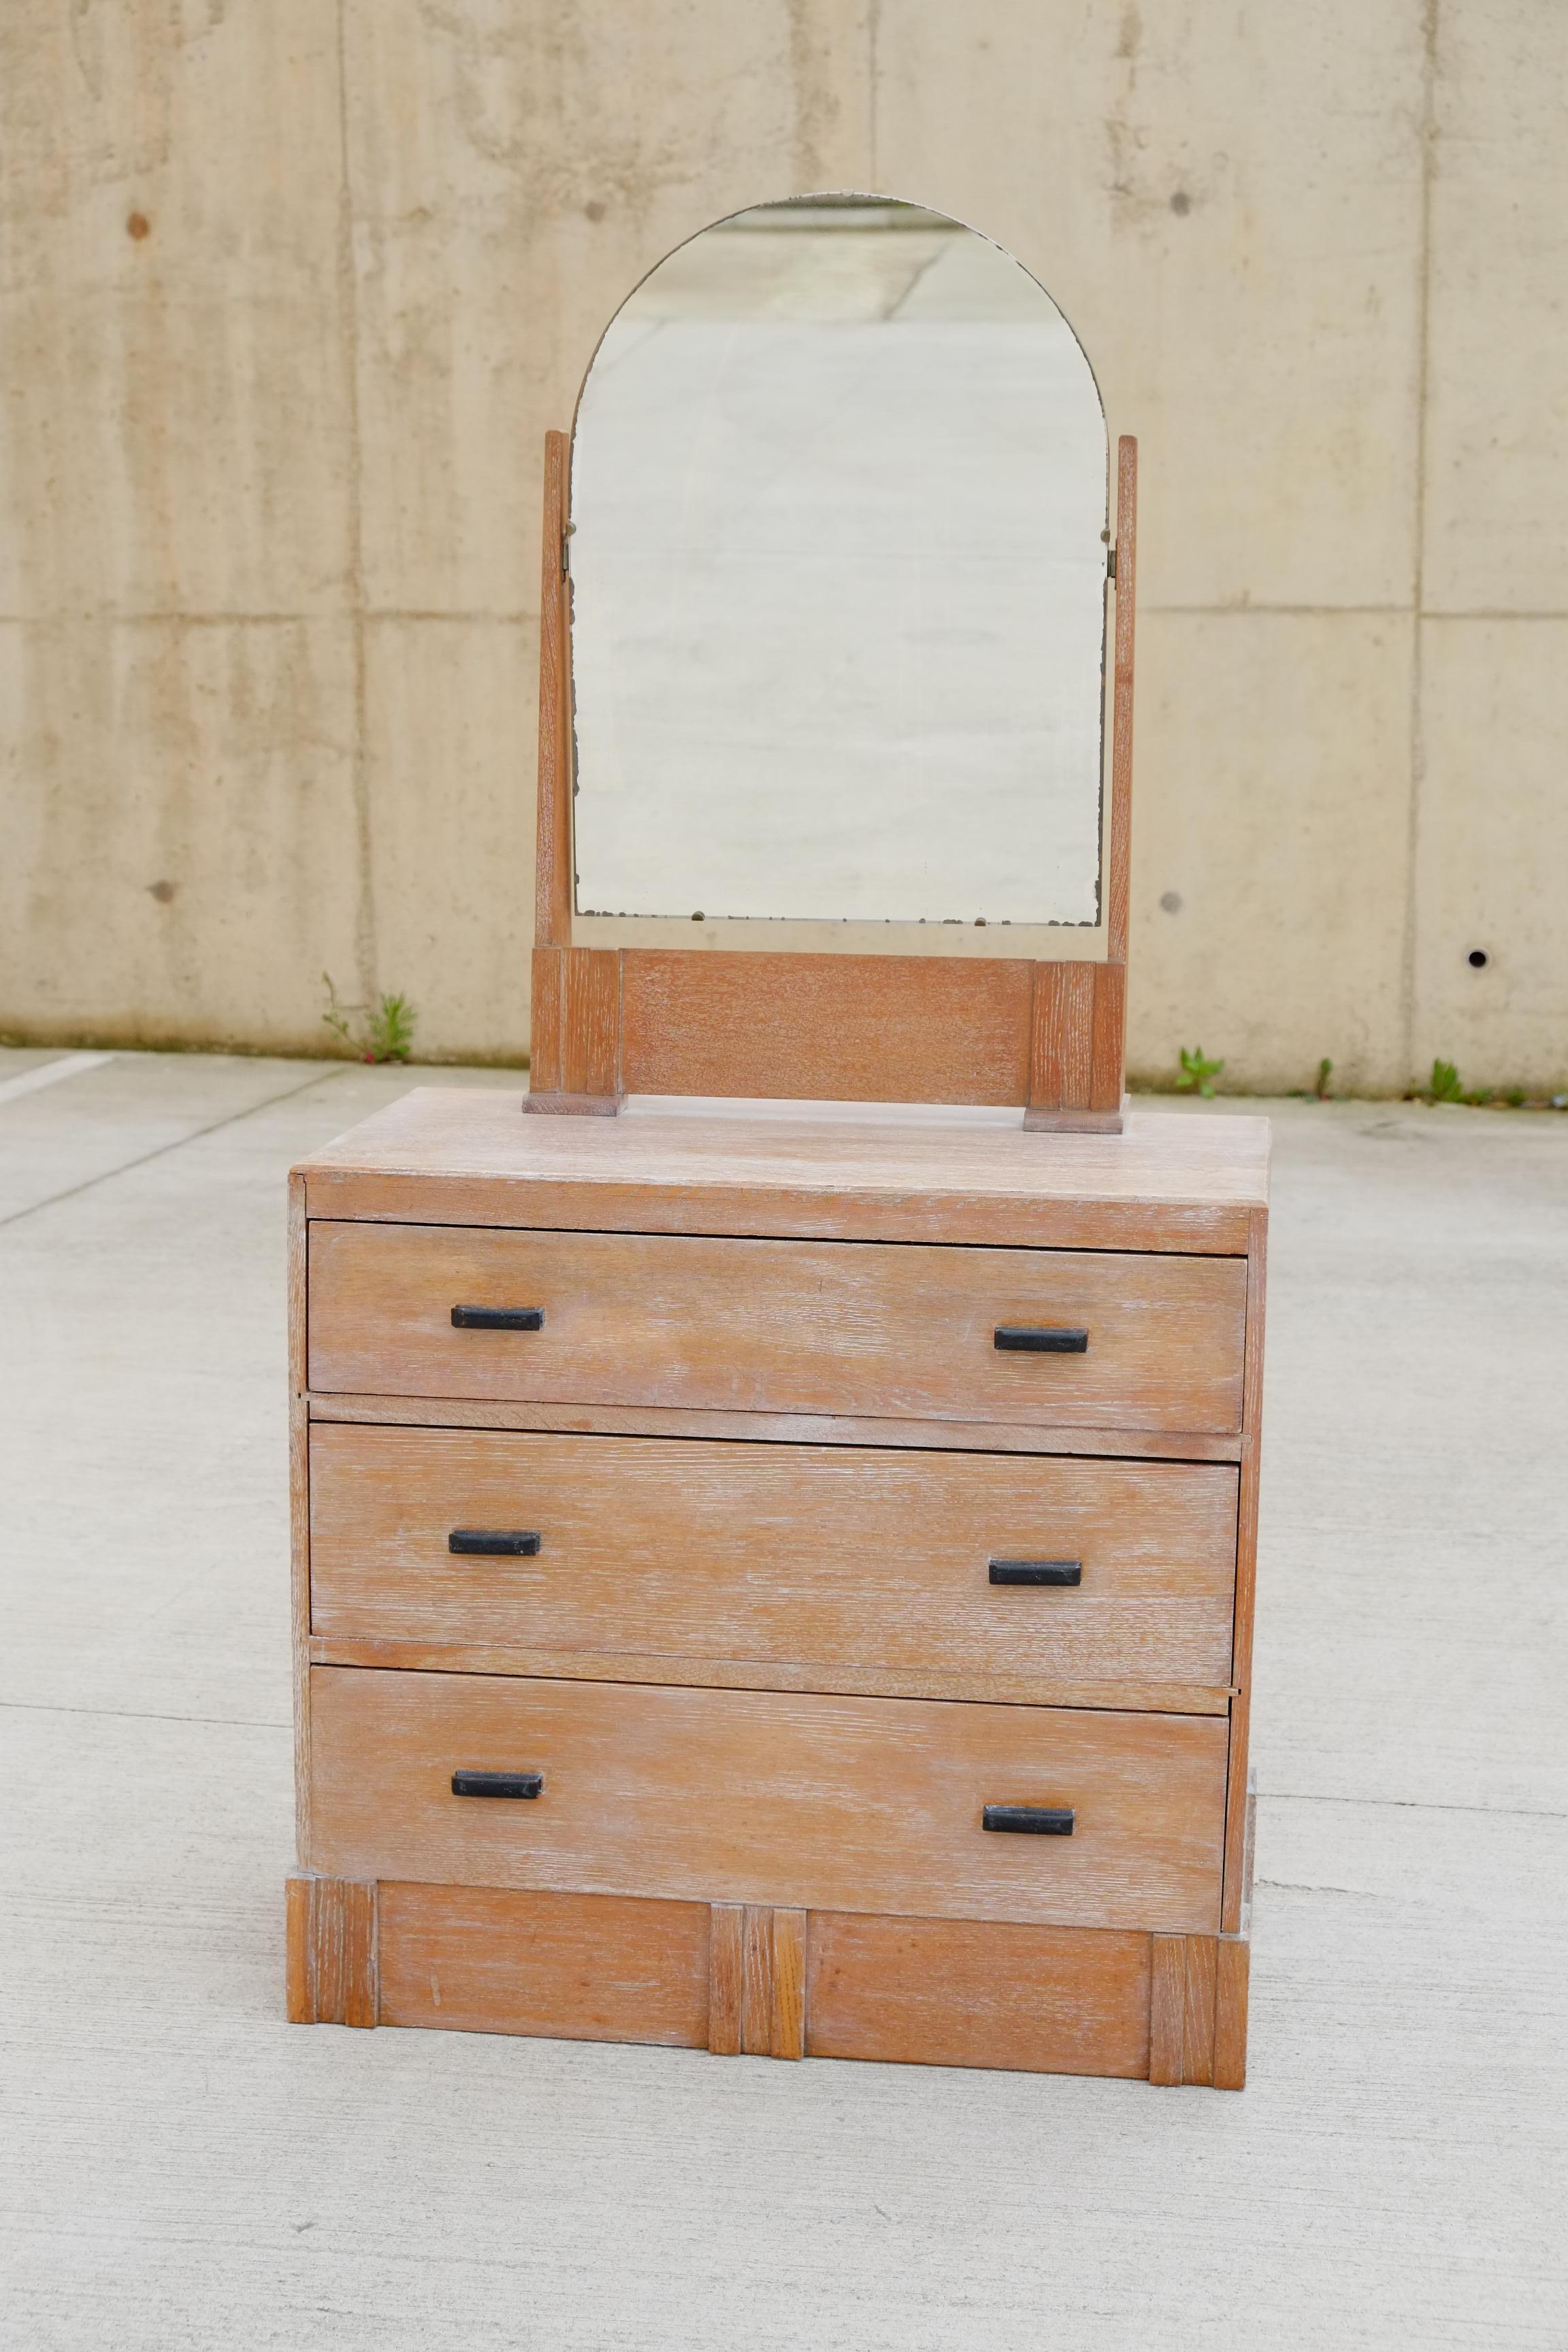 A gorgeous 1930s Art Deco dressing table/vanity from England. Made by Hypnos. This vanity is made of oak with a lime wax finish. Beautiful shape to the mirror. Under the mirror top, there are three large drawers. Lovely black wooden handles to